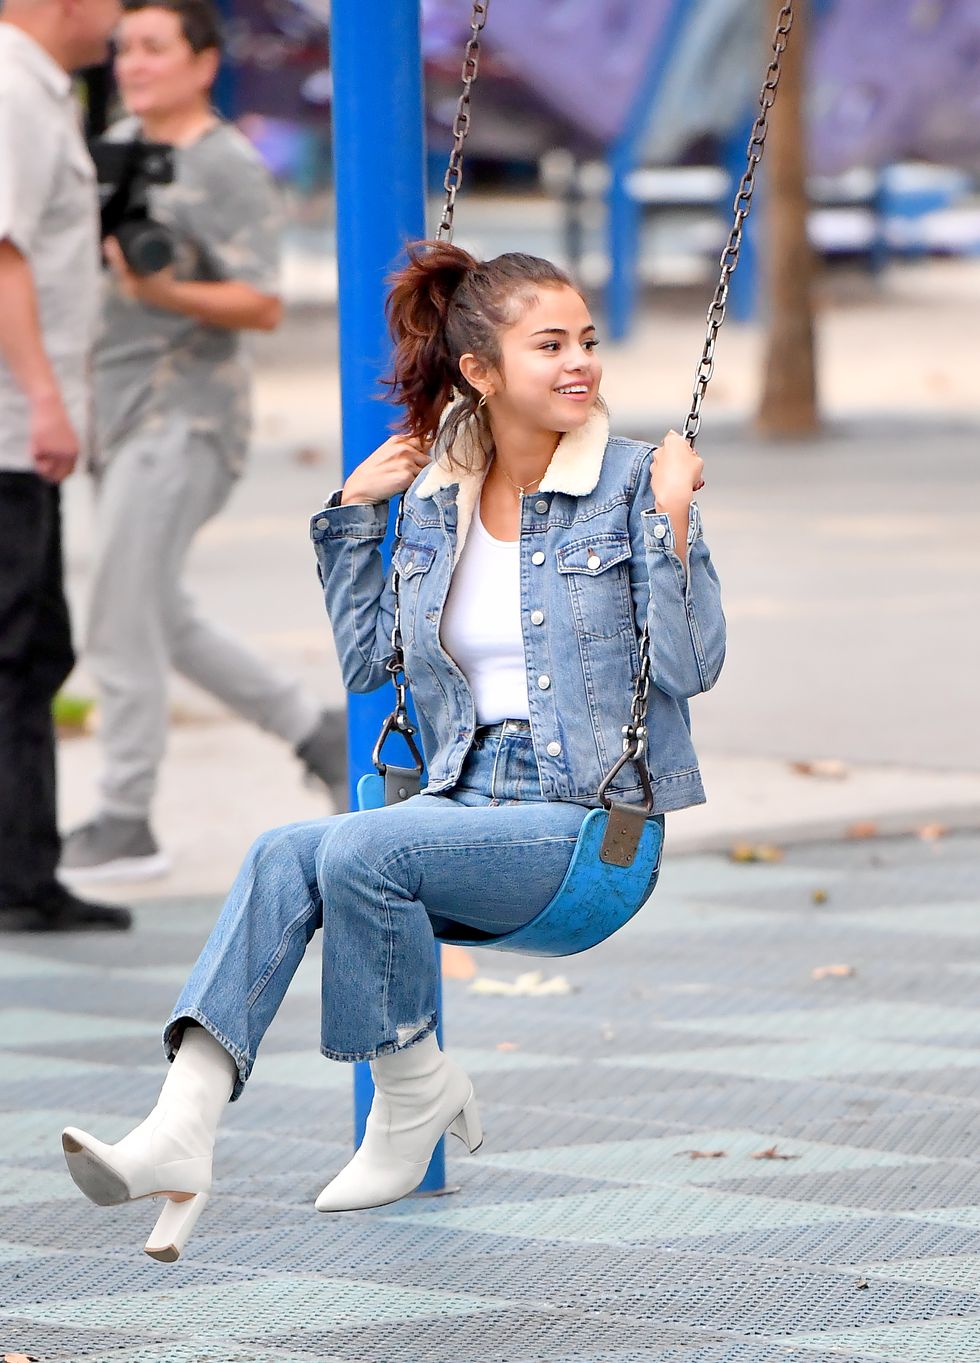 Selena Wore a Denim Outfit to the Playground and Look How Happy She Is